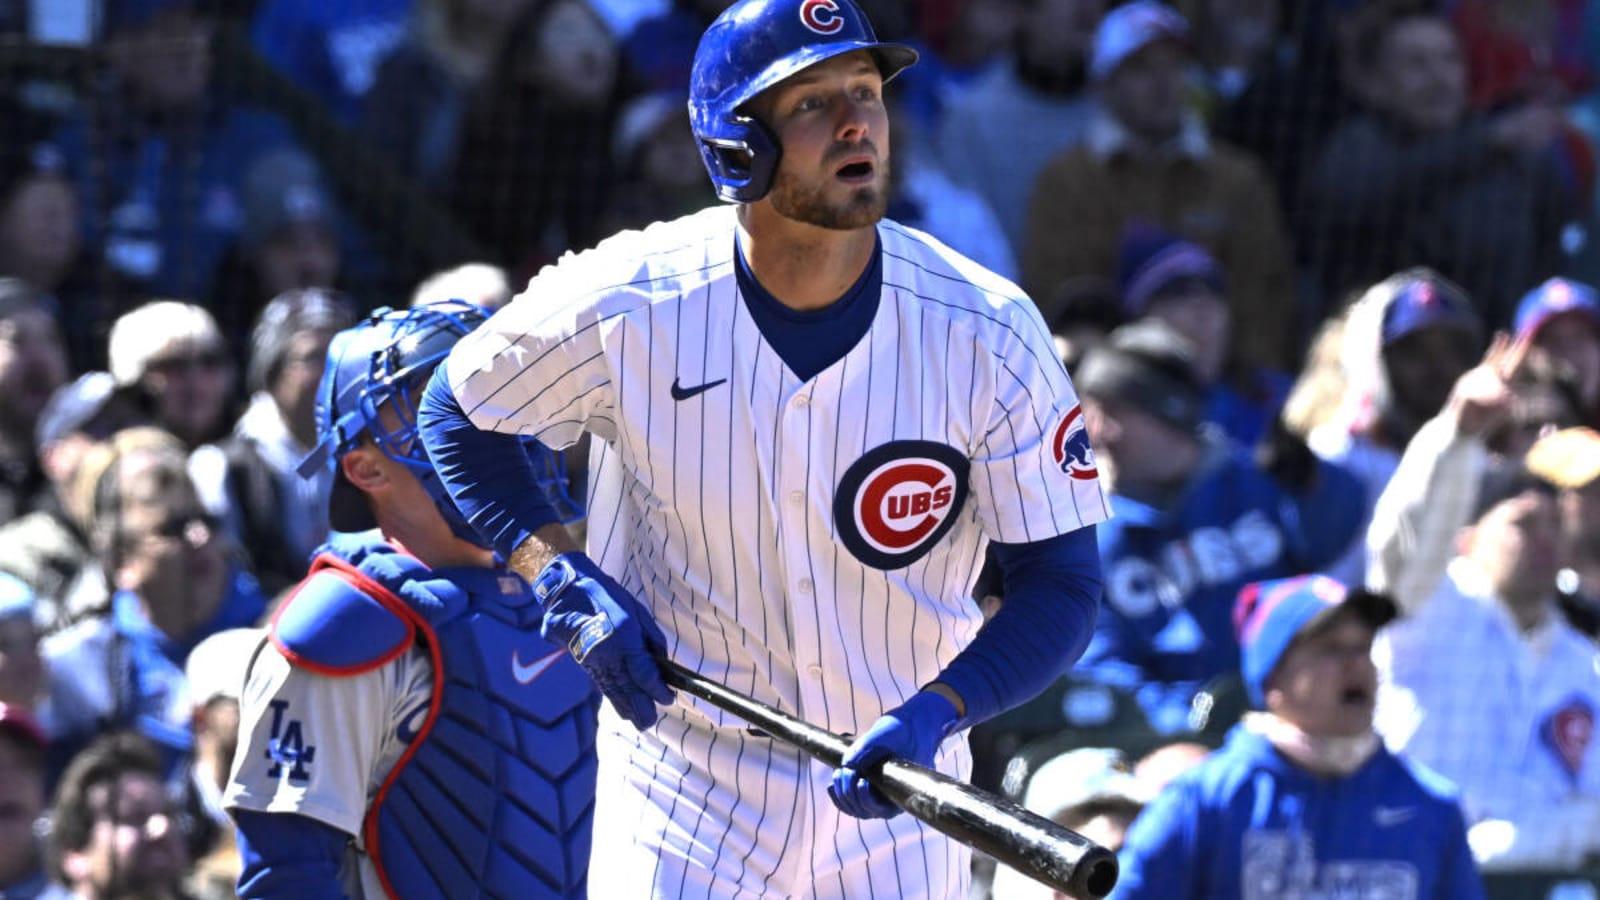 Cubs Guided By Offense to Win Over Dodgers in Series Opener